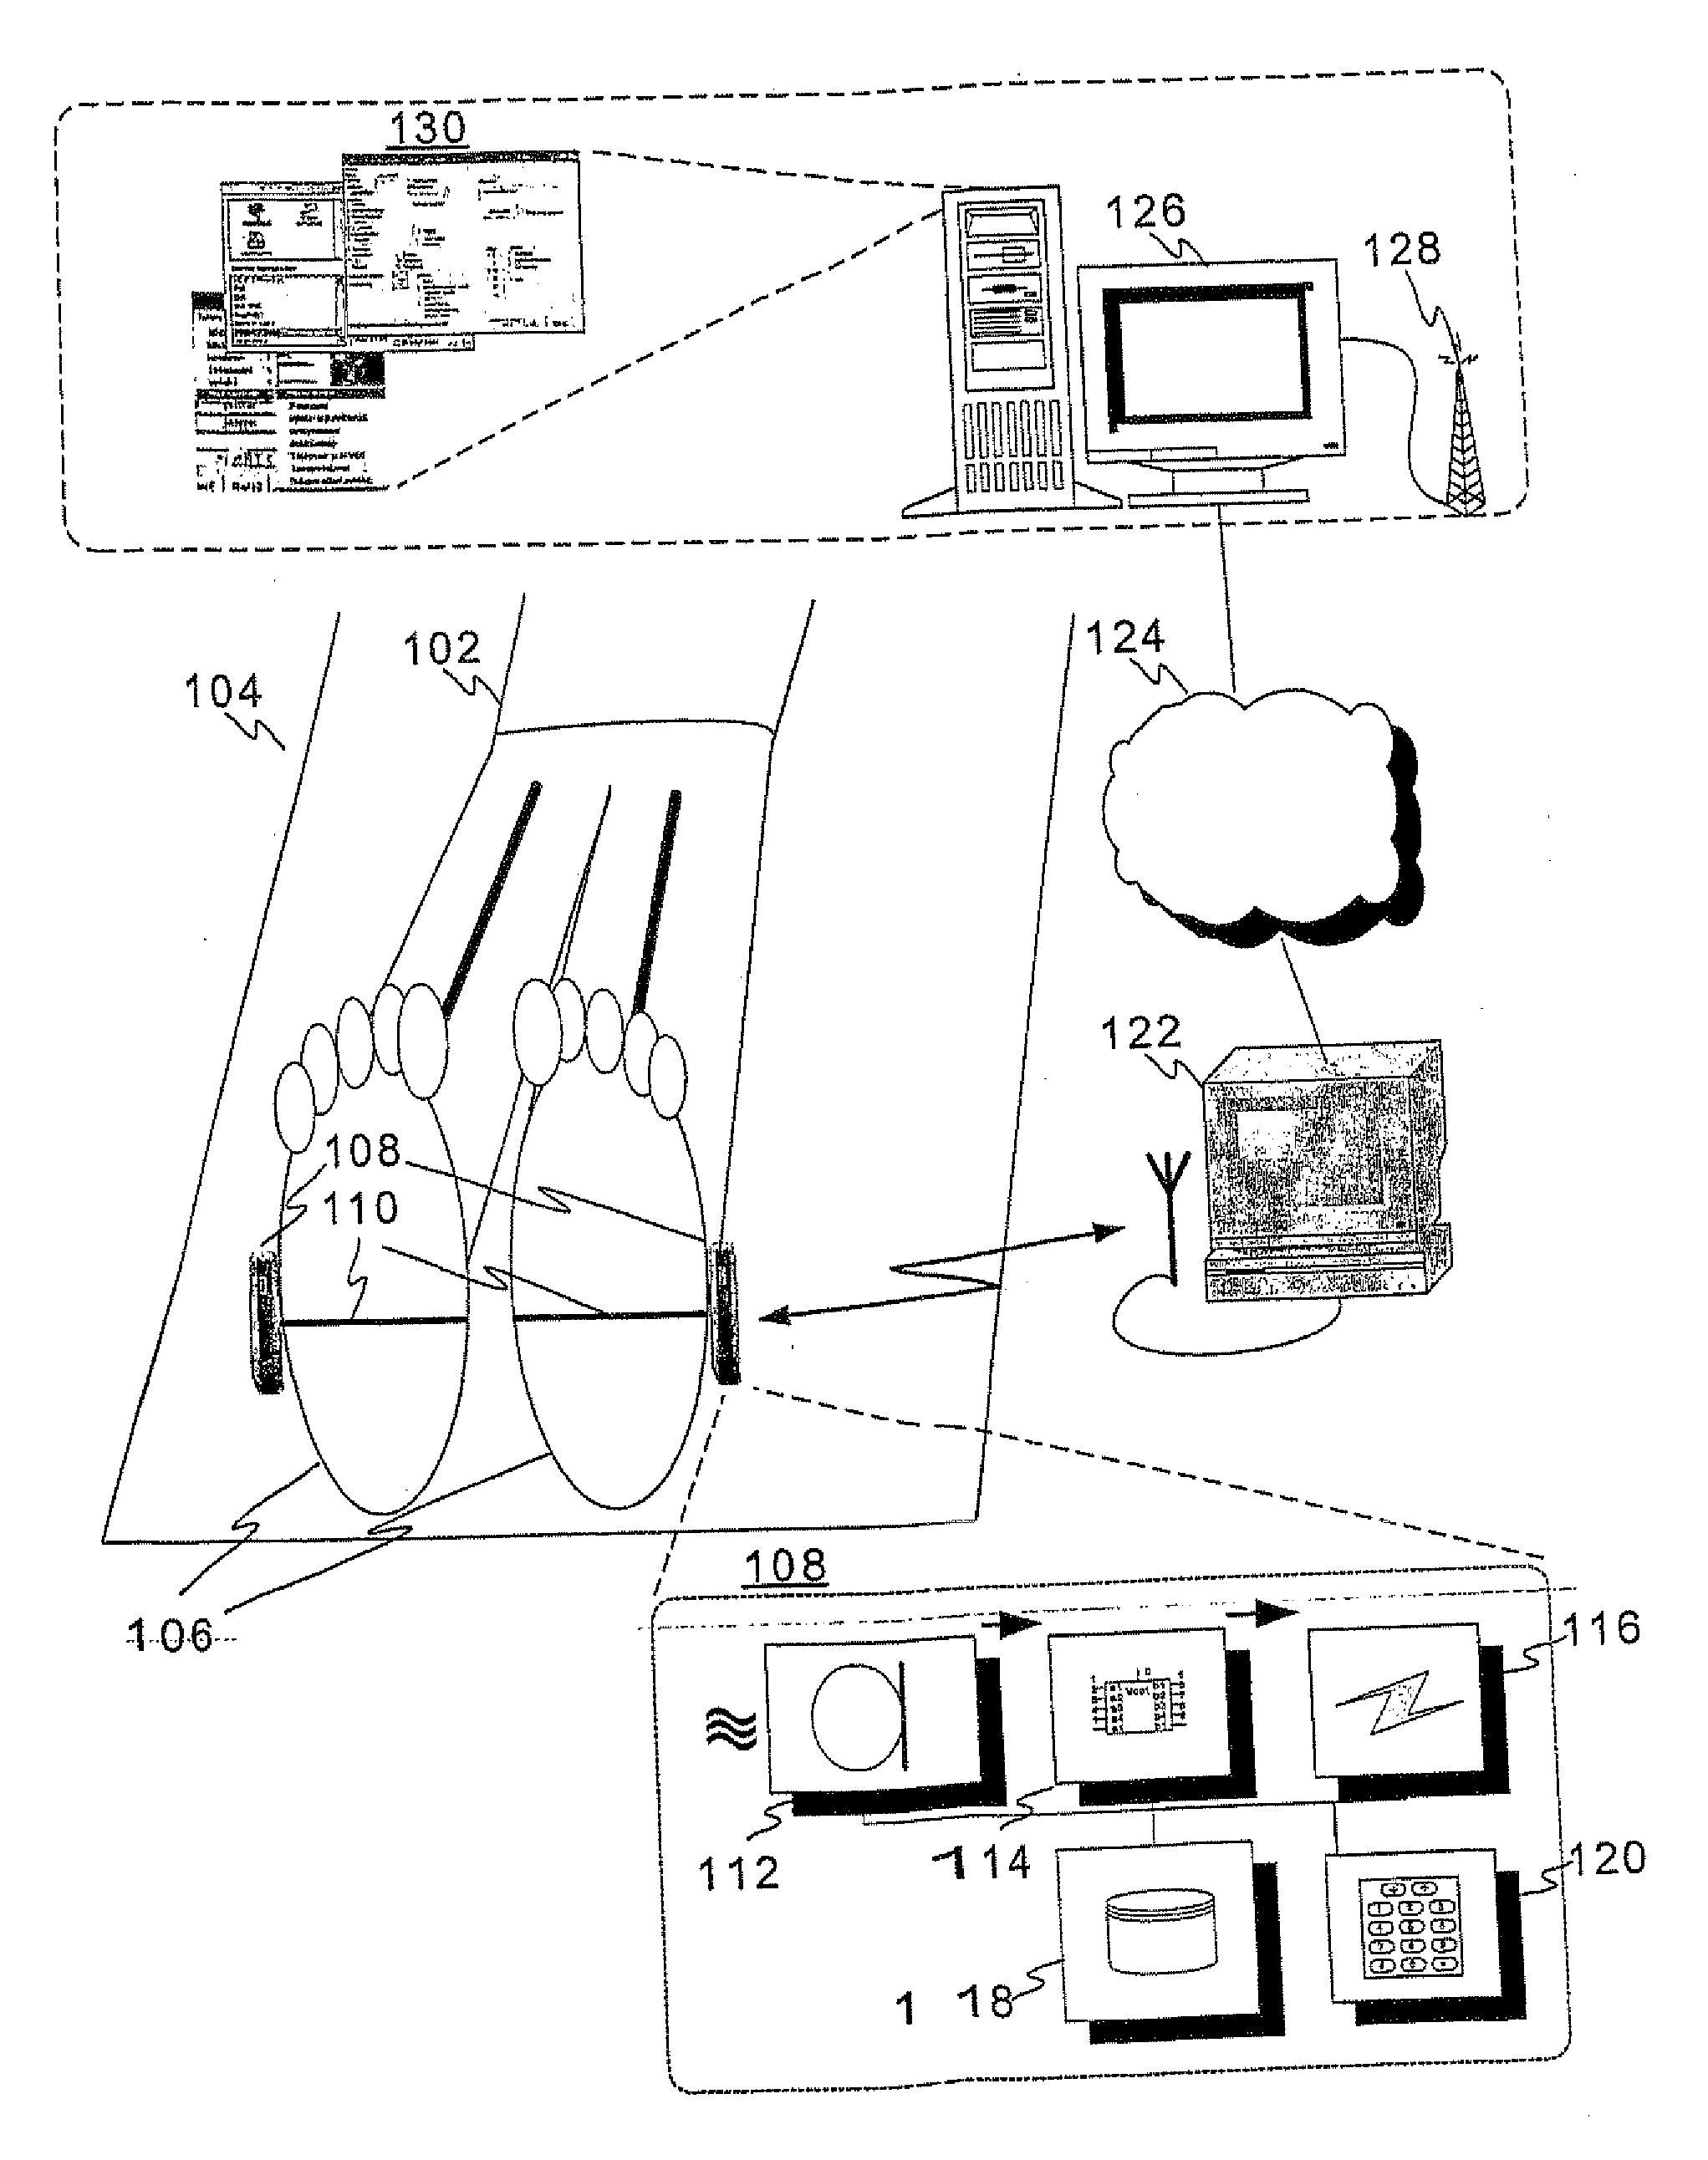 Method and an apparatus for measuring and analyzing movements of a human or an animal using sound signals